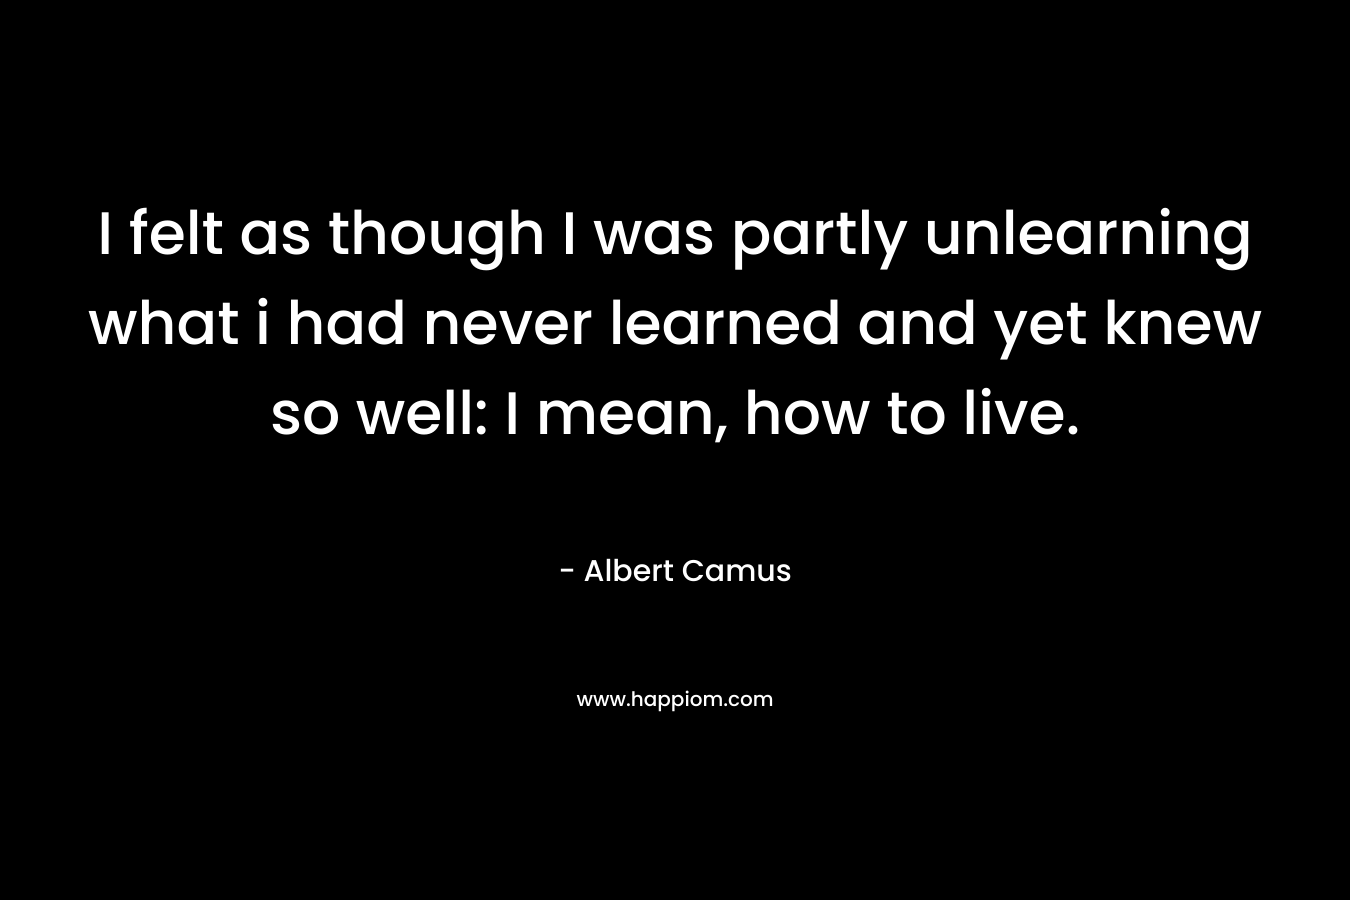 I felt as though I was partly unlearning what i had never learned and yet knew so well: I mean, how to live. – Albert Camus